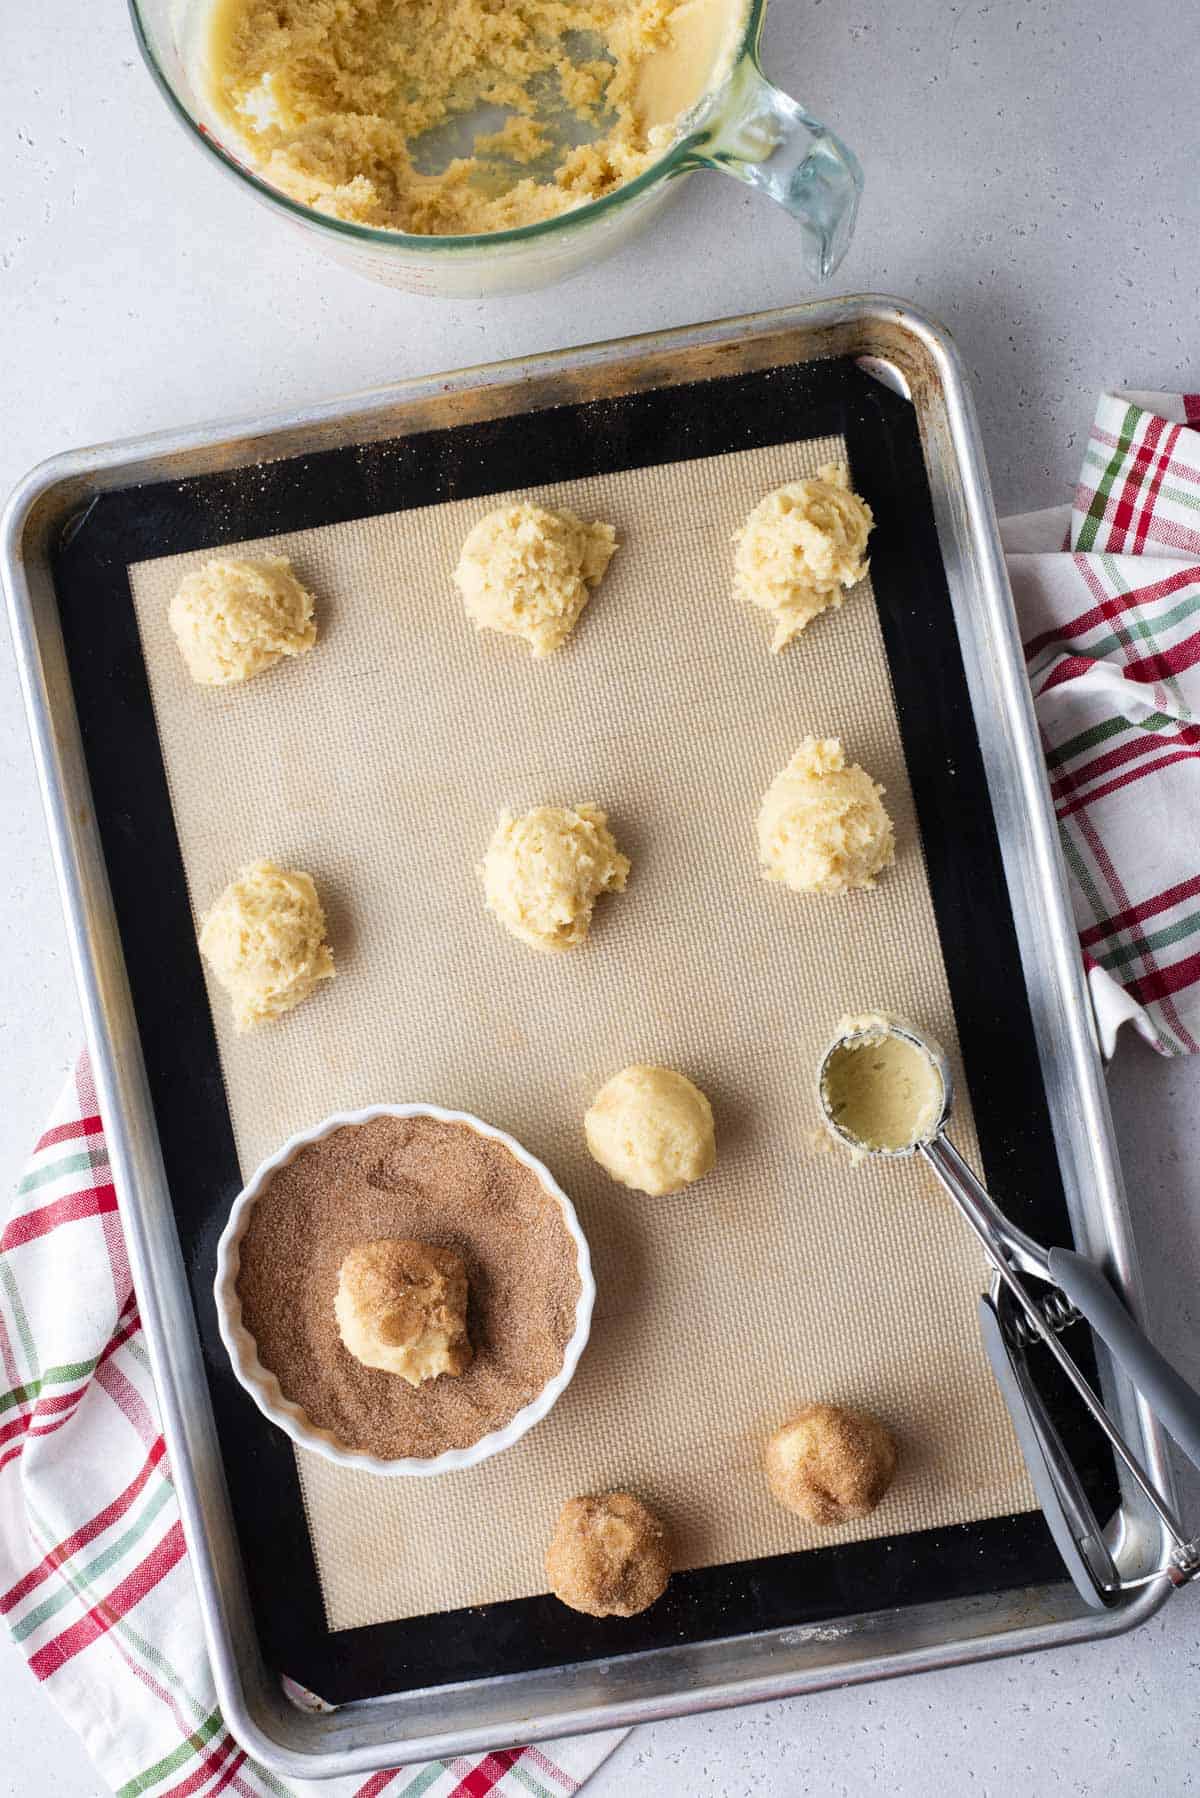 a sheet pan lined with a silicone baking mat with balls of snickerdoodle cookie dough in rows on it, with a cookie scoop and bowl of cinnamon sugar on the baking sheet, and two of the dough balls coated in the mixture. Beside the pan, a glass measuring dish with remnants of cookie dough in it and under the pan, a green, red and white plaid kitchen towel